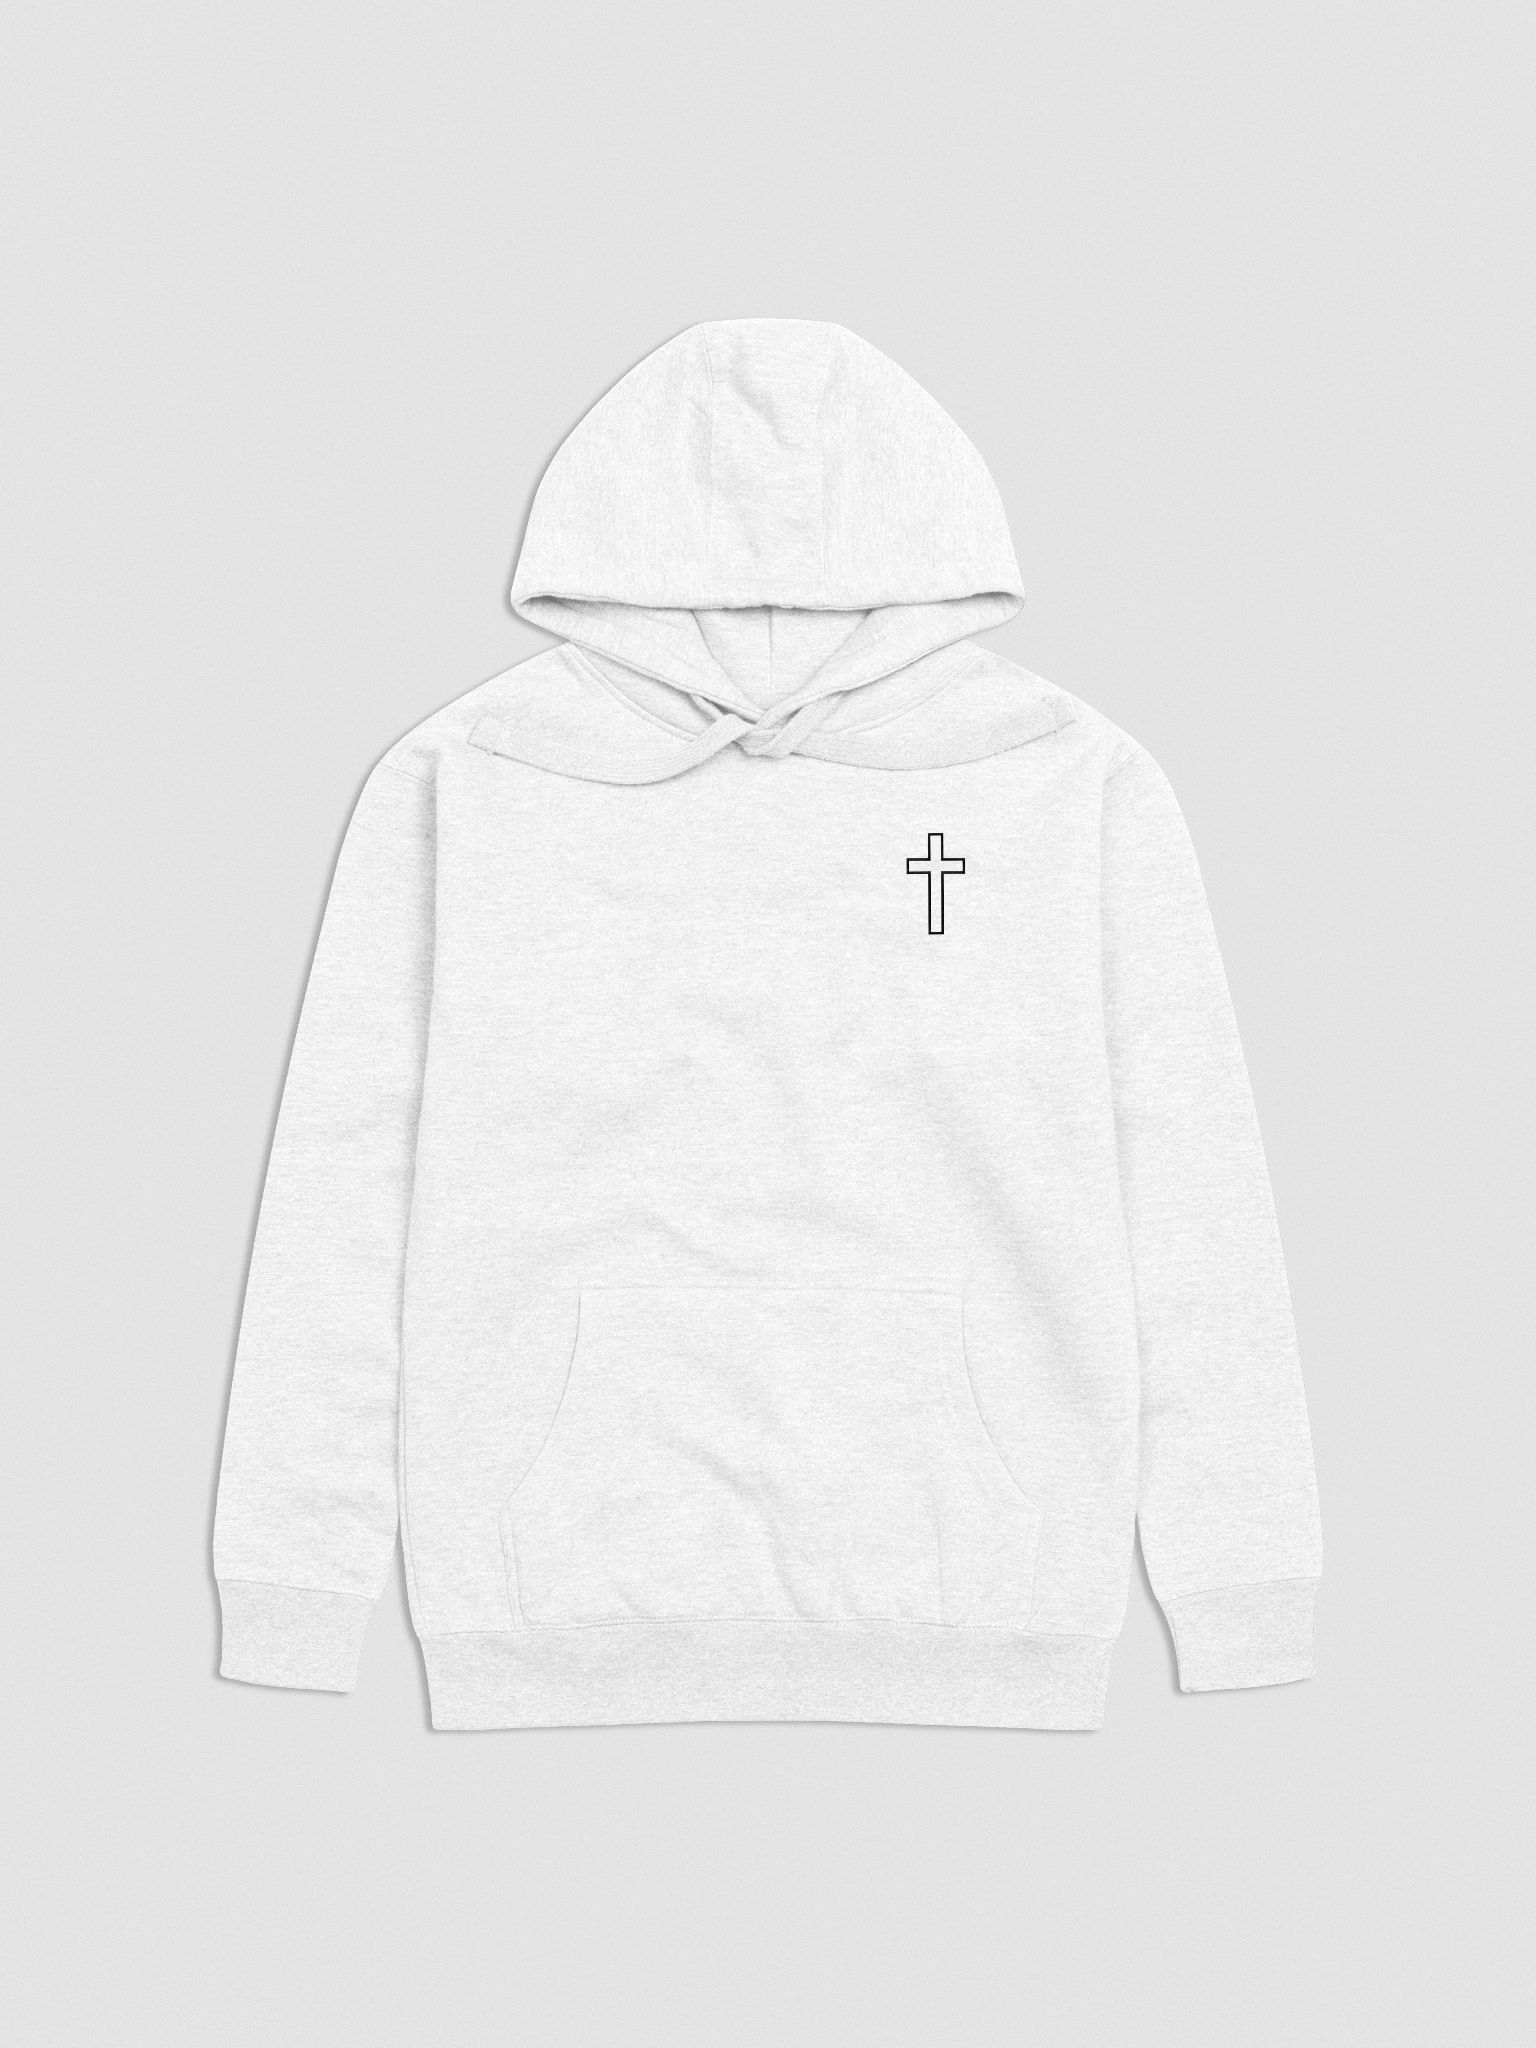 Simple Cross Embroidered White Hoodie | HVN Threads